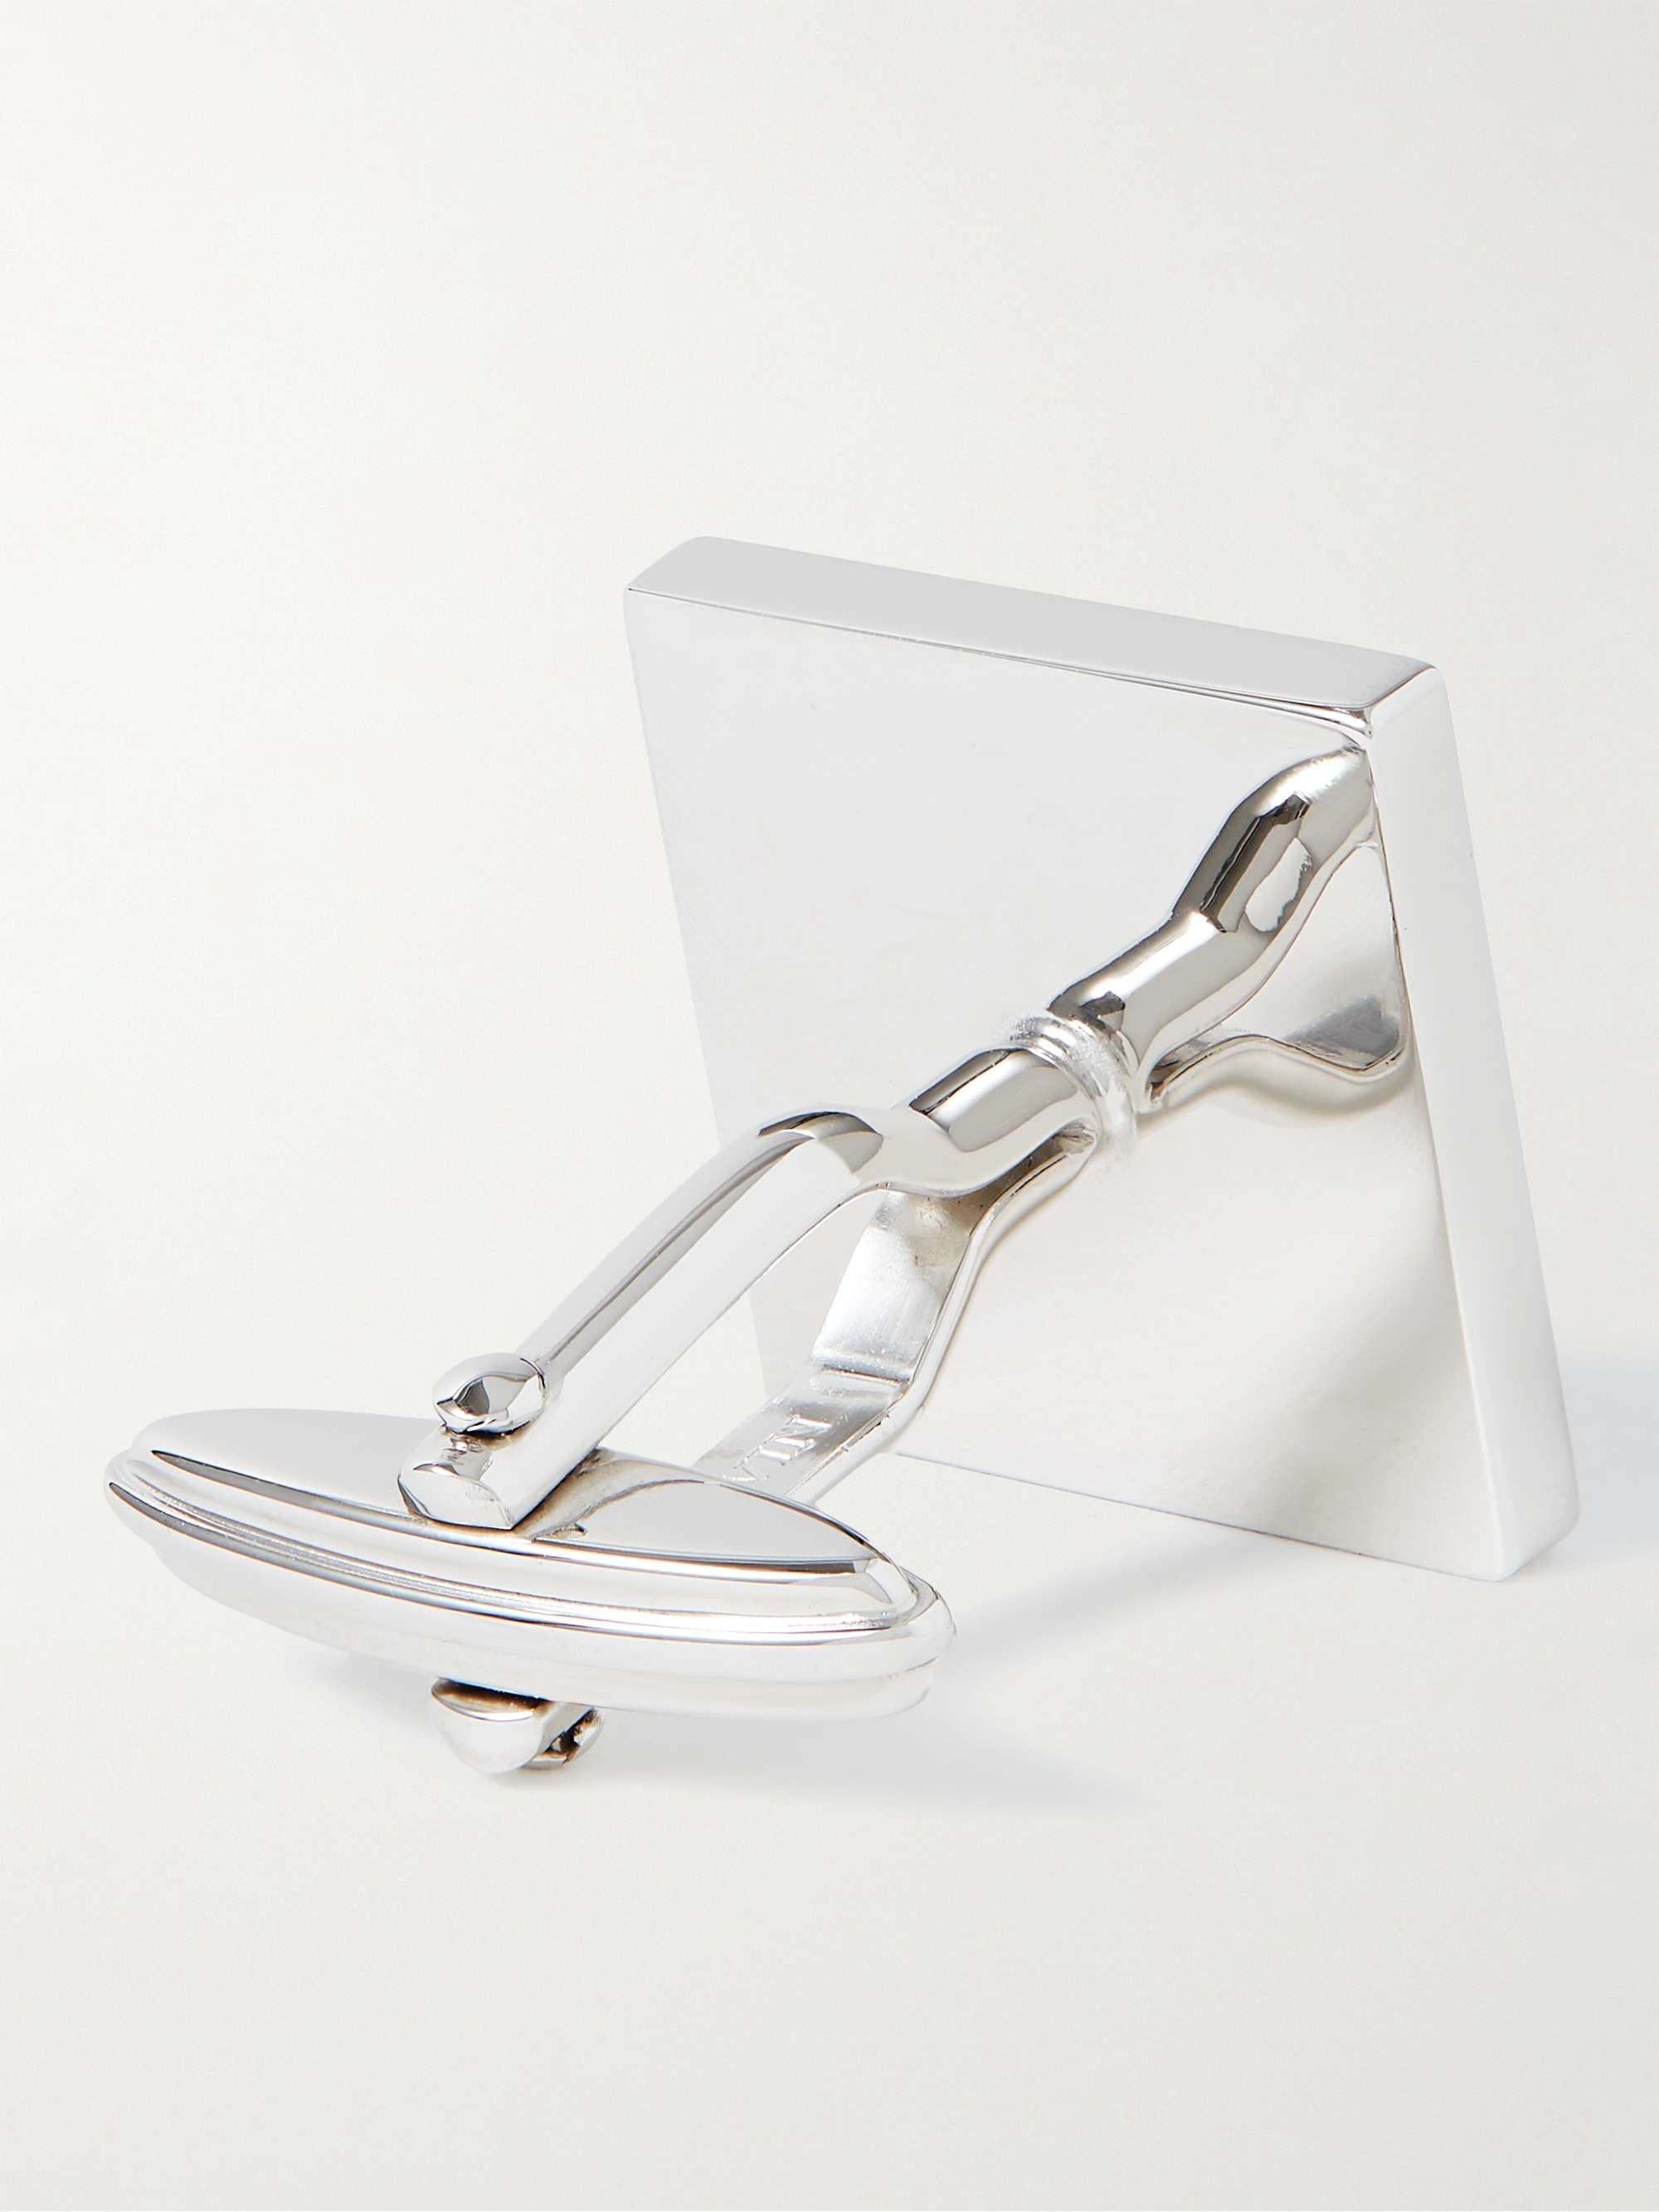 LANVIN Rhodium-Plated and Lacquered Cufflinks